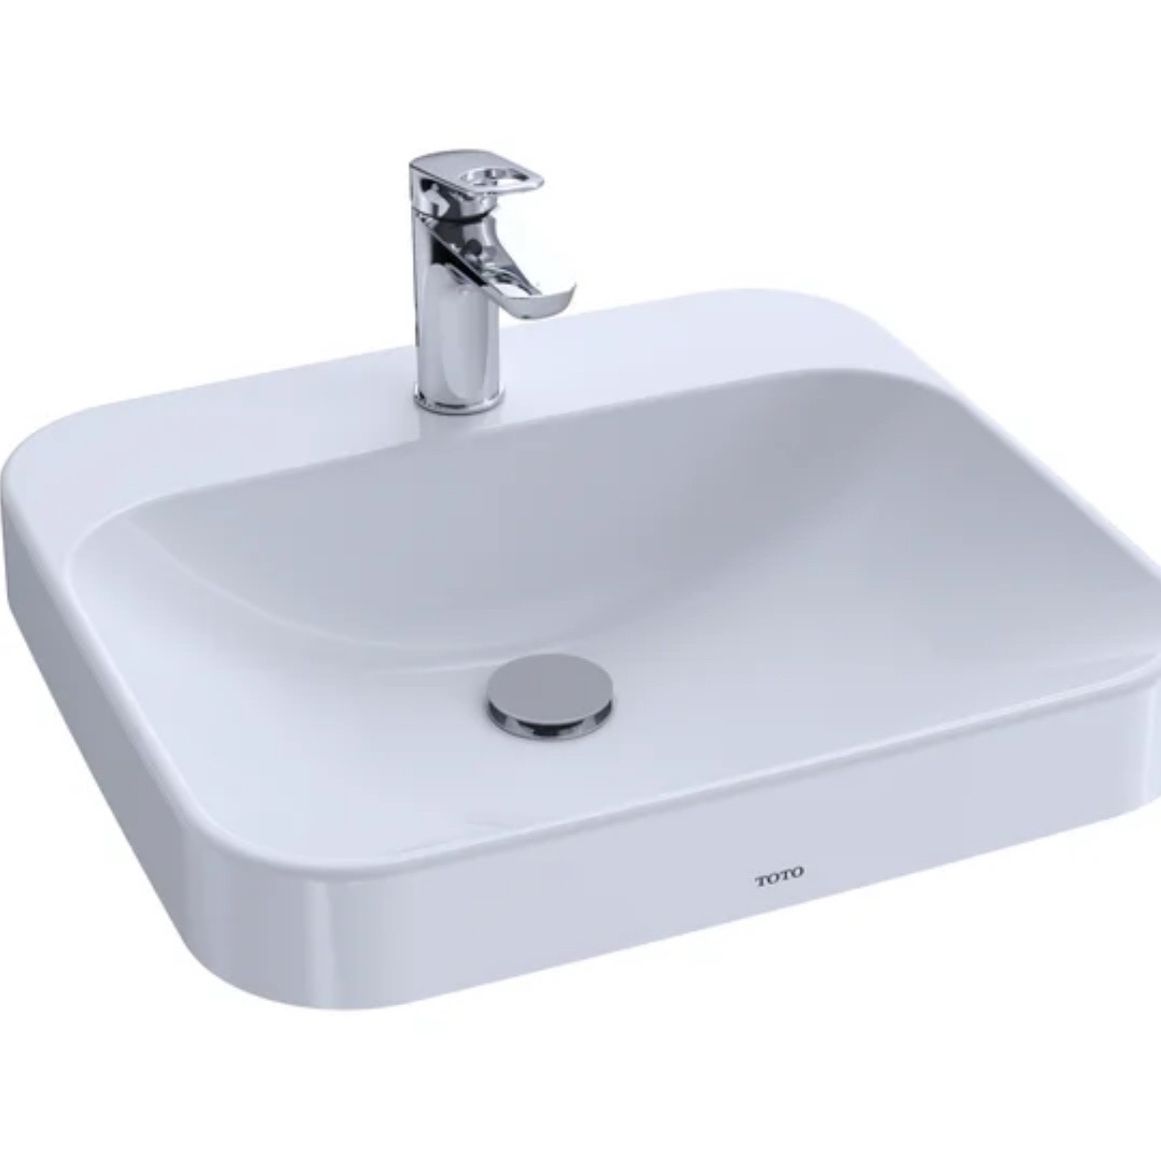 TOTO Sinks - Brand New - Arvina White Vitreous China Vessel Bathroom Sink w/ Overflow